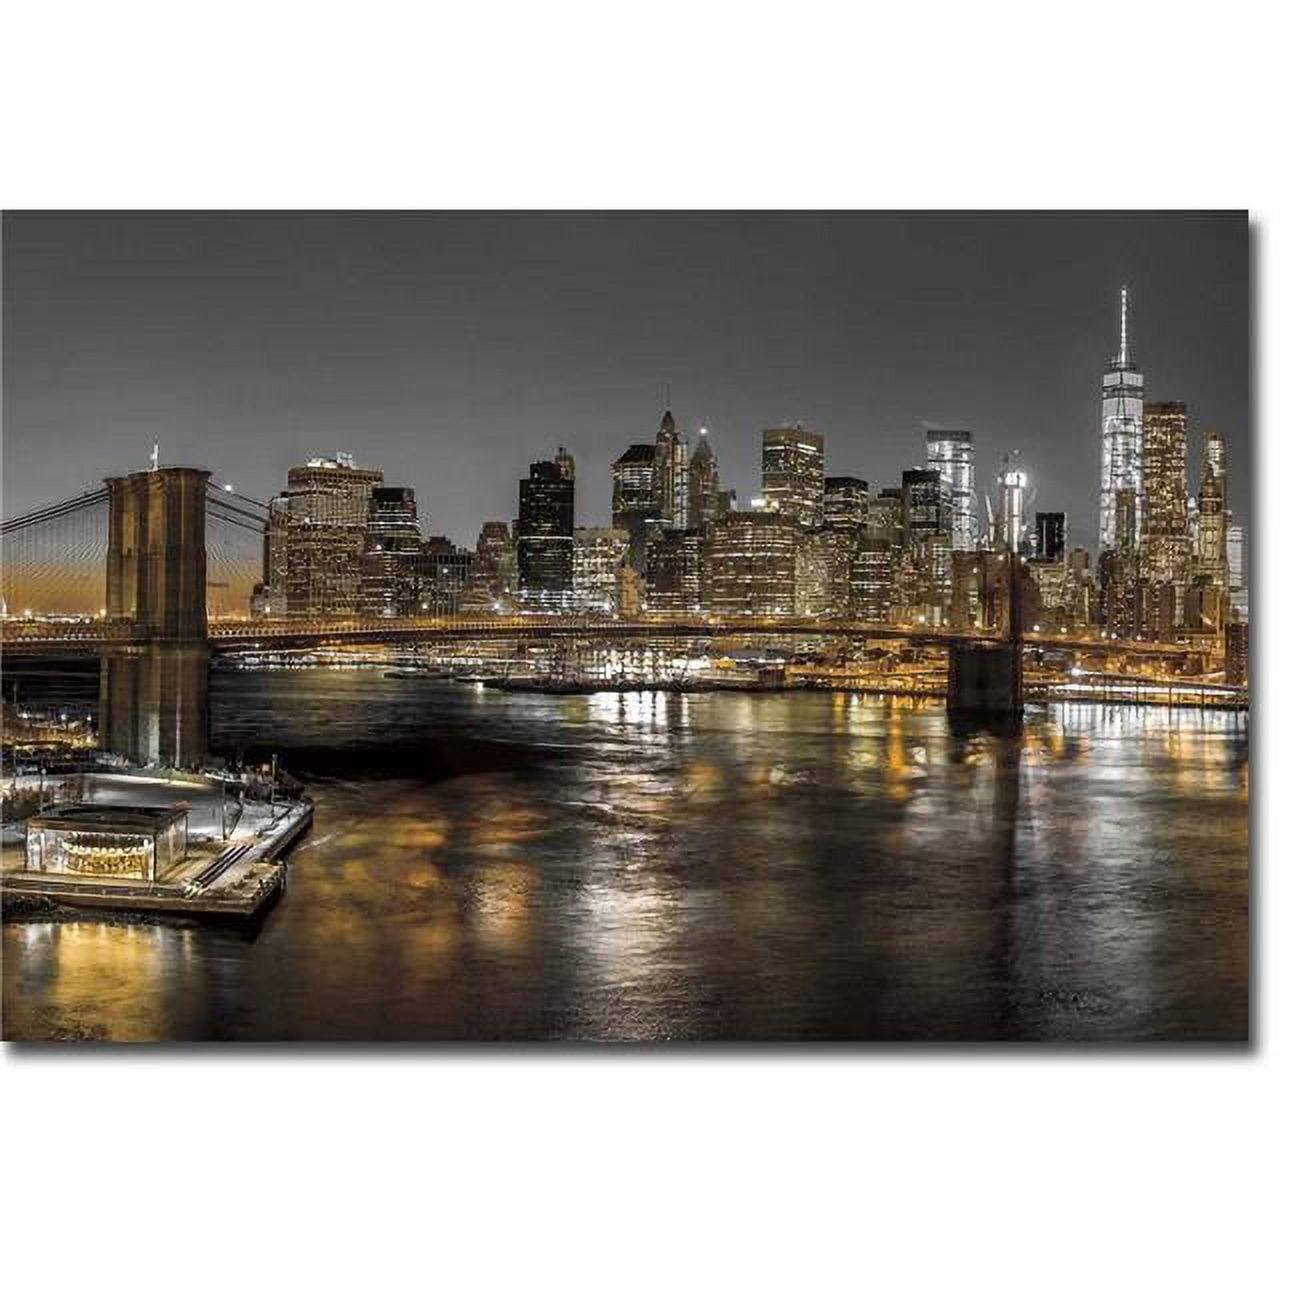 1218i796cg New York Pano By Frank Assaf Premium Gallery-wrapped Canvas Giclee Panorama Art - 12 X 18 X 1.5 In.